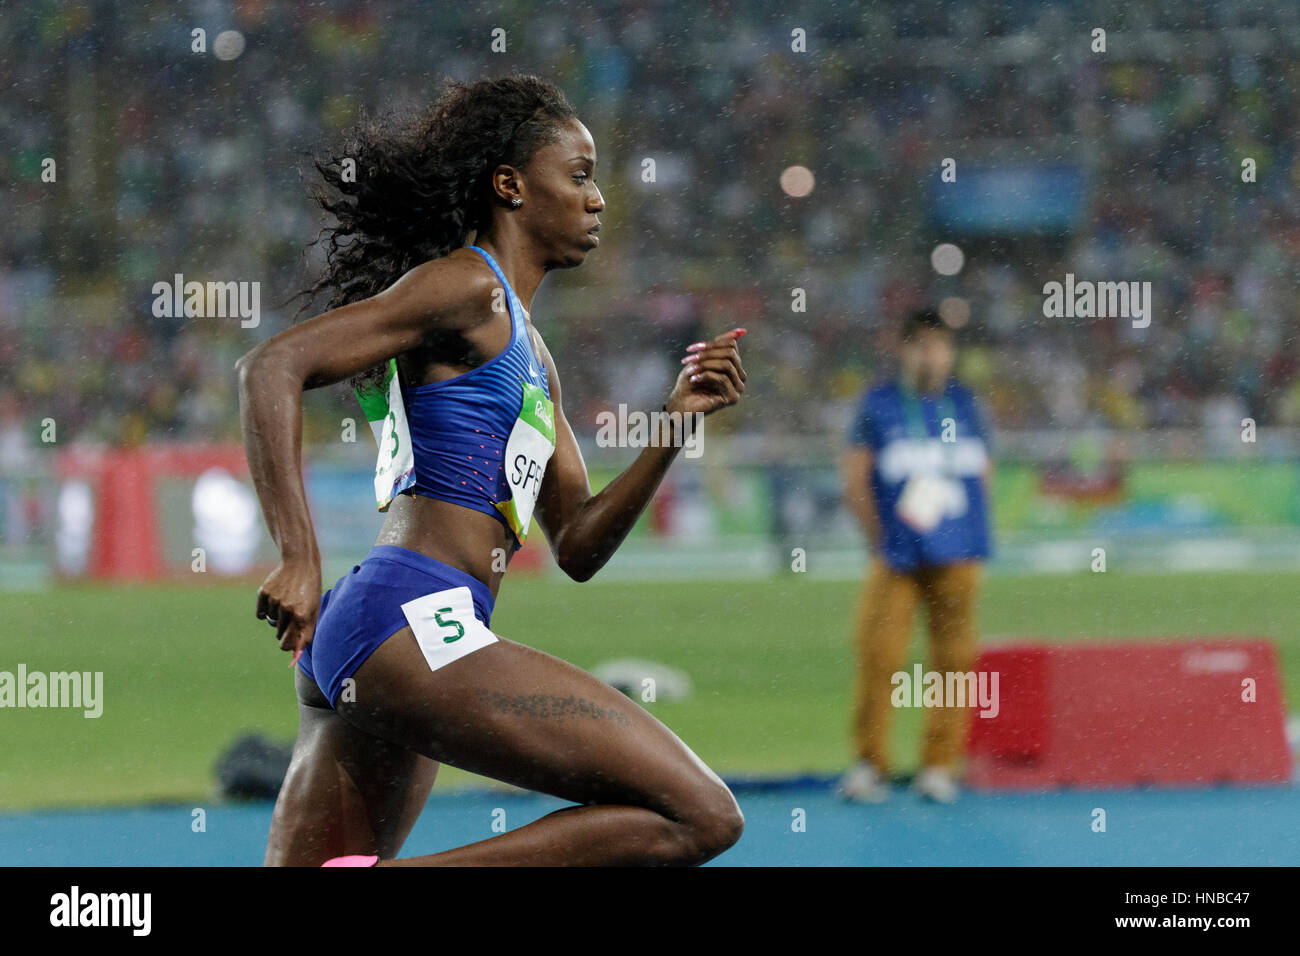 Rio de Janeiro, Brazil. 18 August 2016.  Athletics, Ashley Spencer (USA) competing in the Women's 400m Hurdles finals at the 2016 Olympic Summer Games Stock Photo